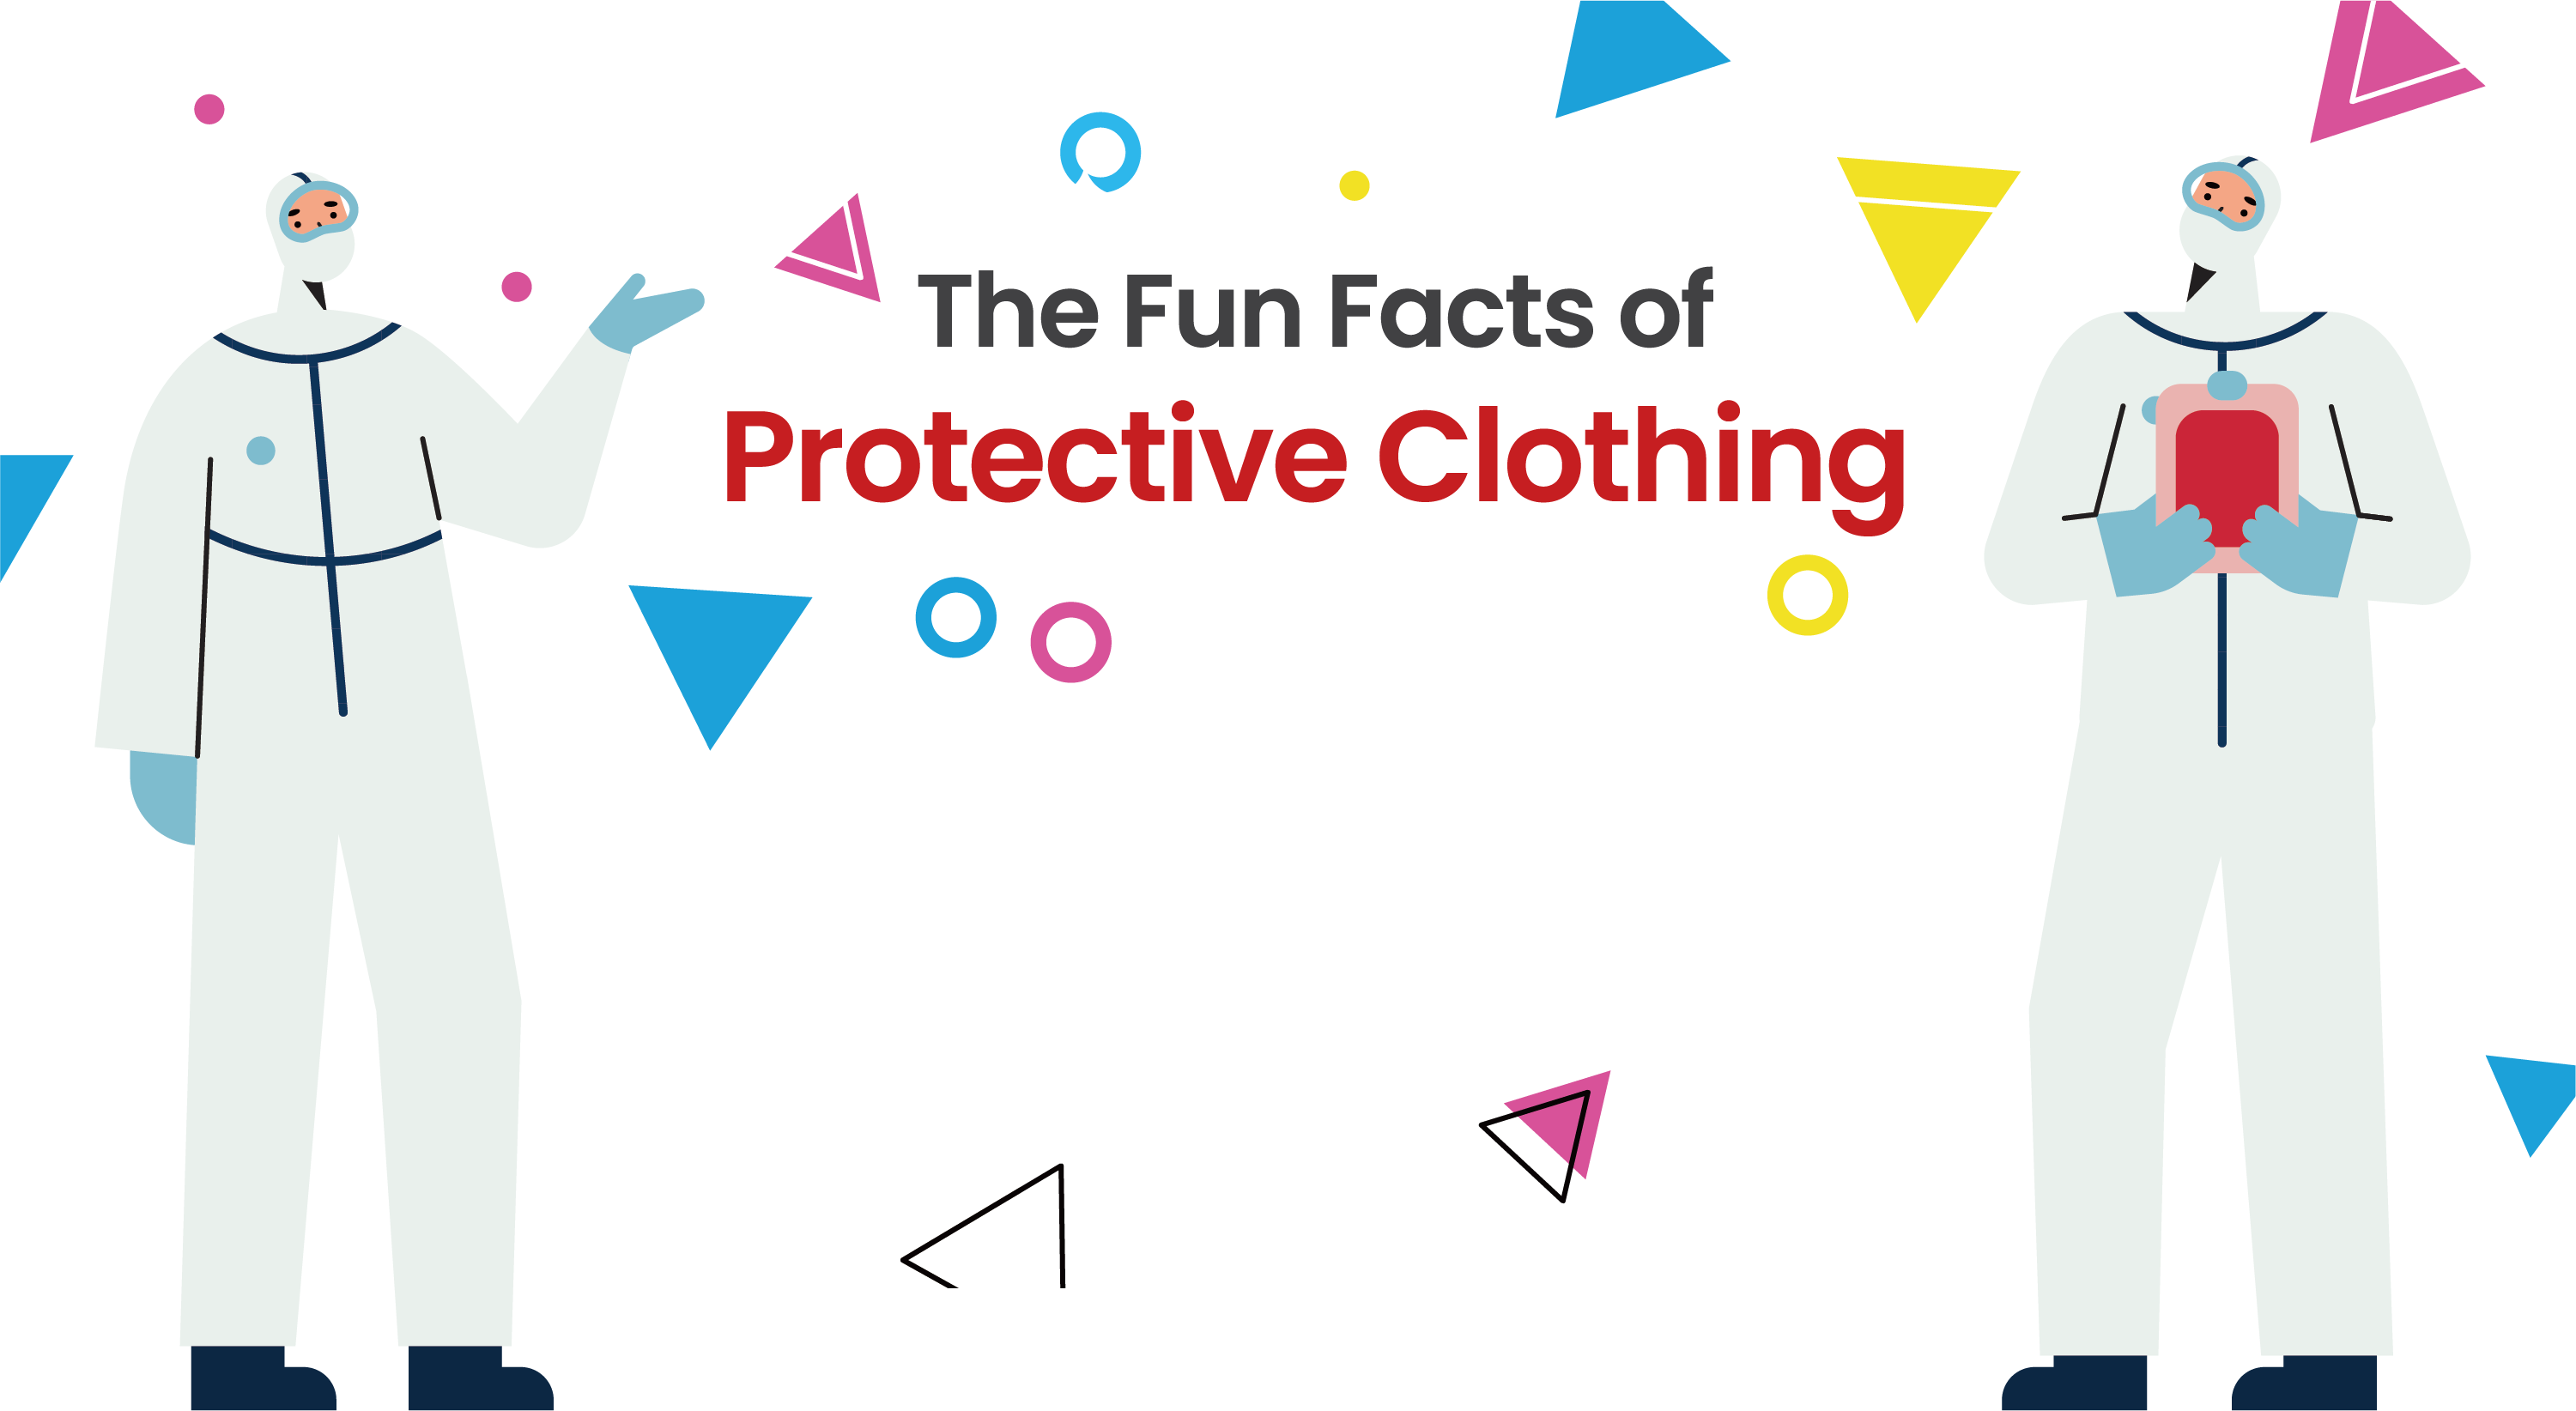 Fun Facts of Protective Clothing